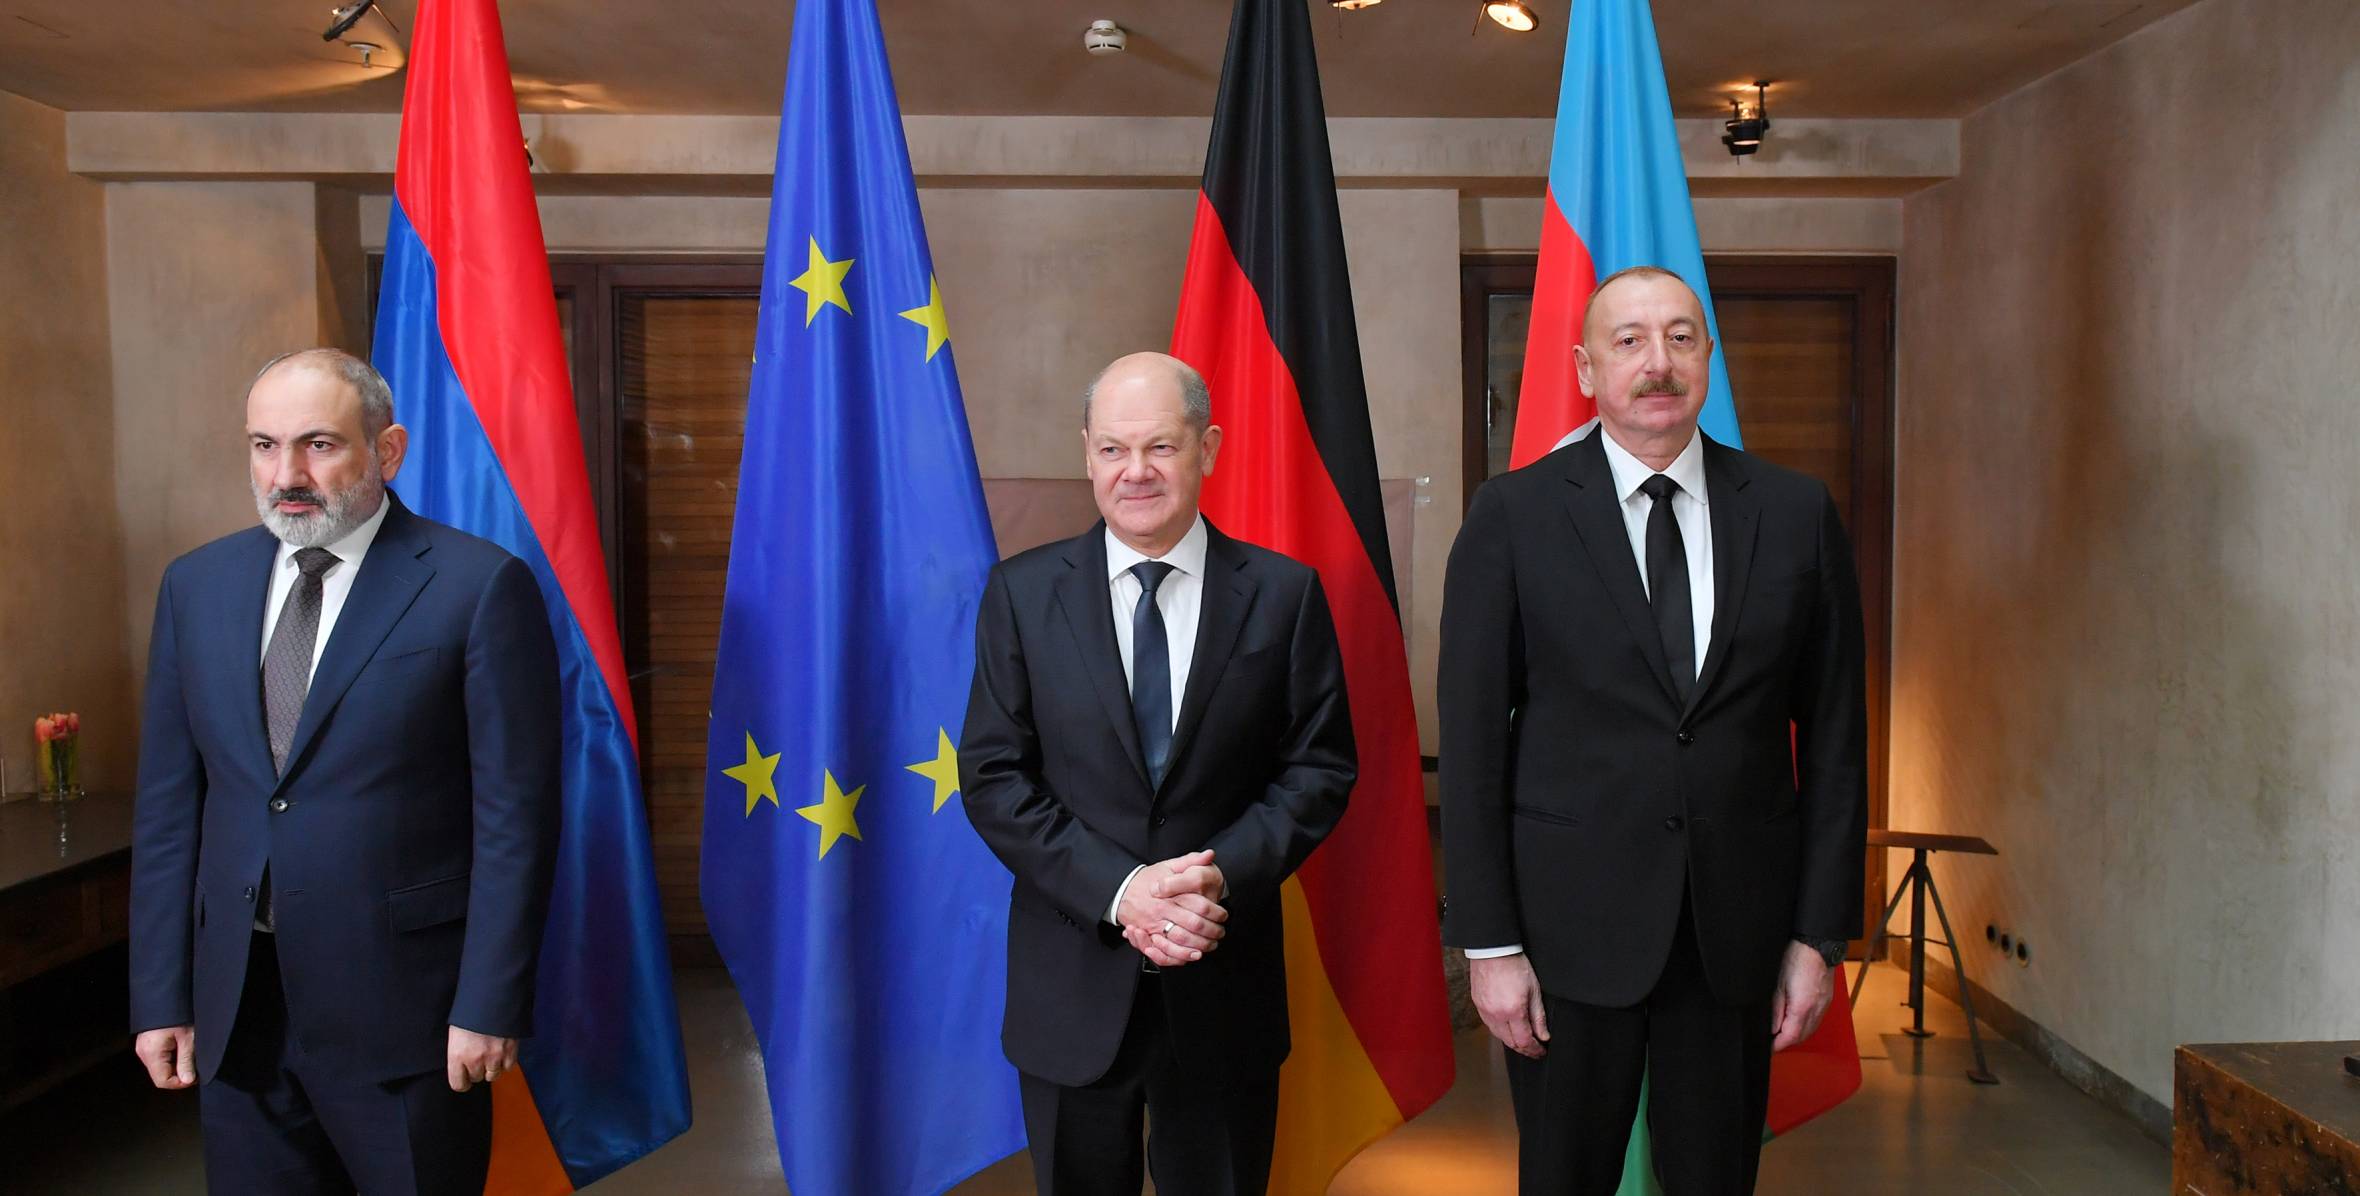 Ilham Aliyev held meetings with Chancellor of Germany Olaf Scholz and Prime Minister of Armenia Nikol Pashinyan